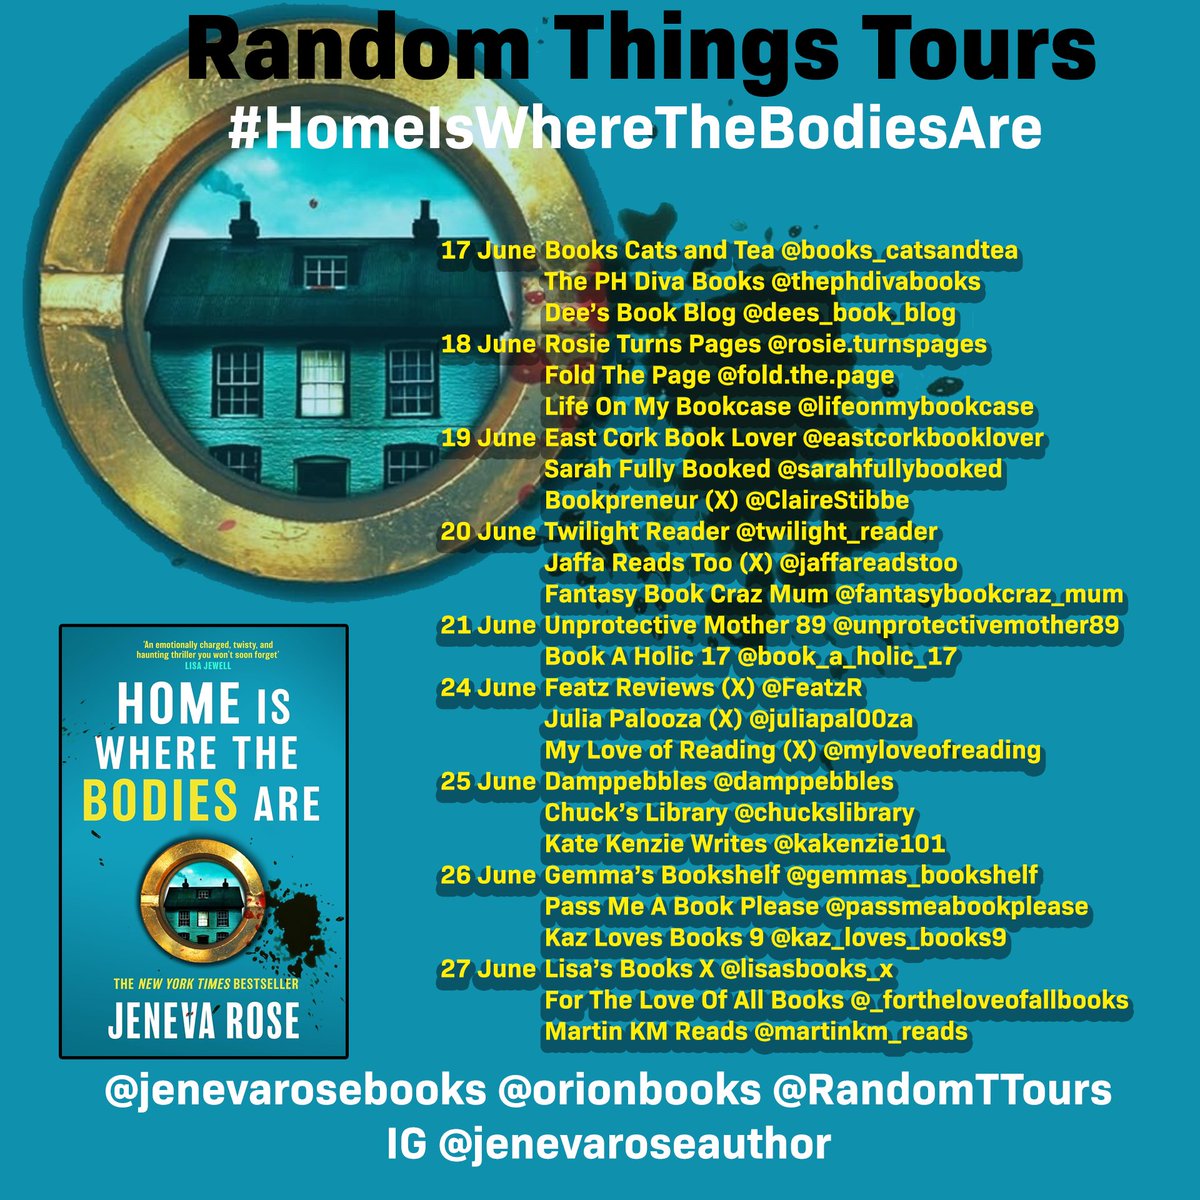 So excited to be taking part in this AMAZING blog tour. Thank you to @RandomTTours @orionbooks @jenevarosebooks for the privilege. 

#HomeIsWhereTheBodiesAre
#BlogTour